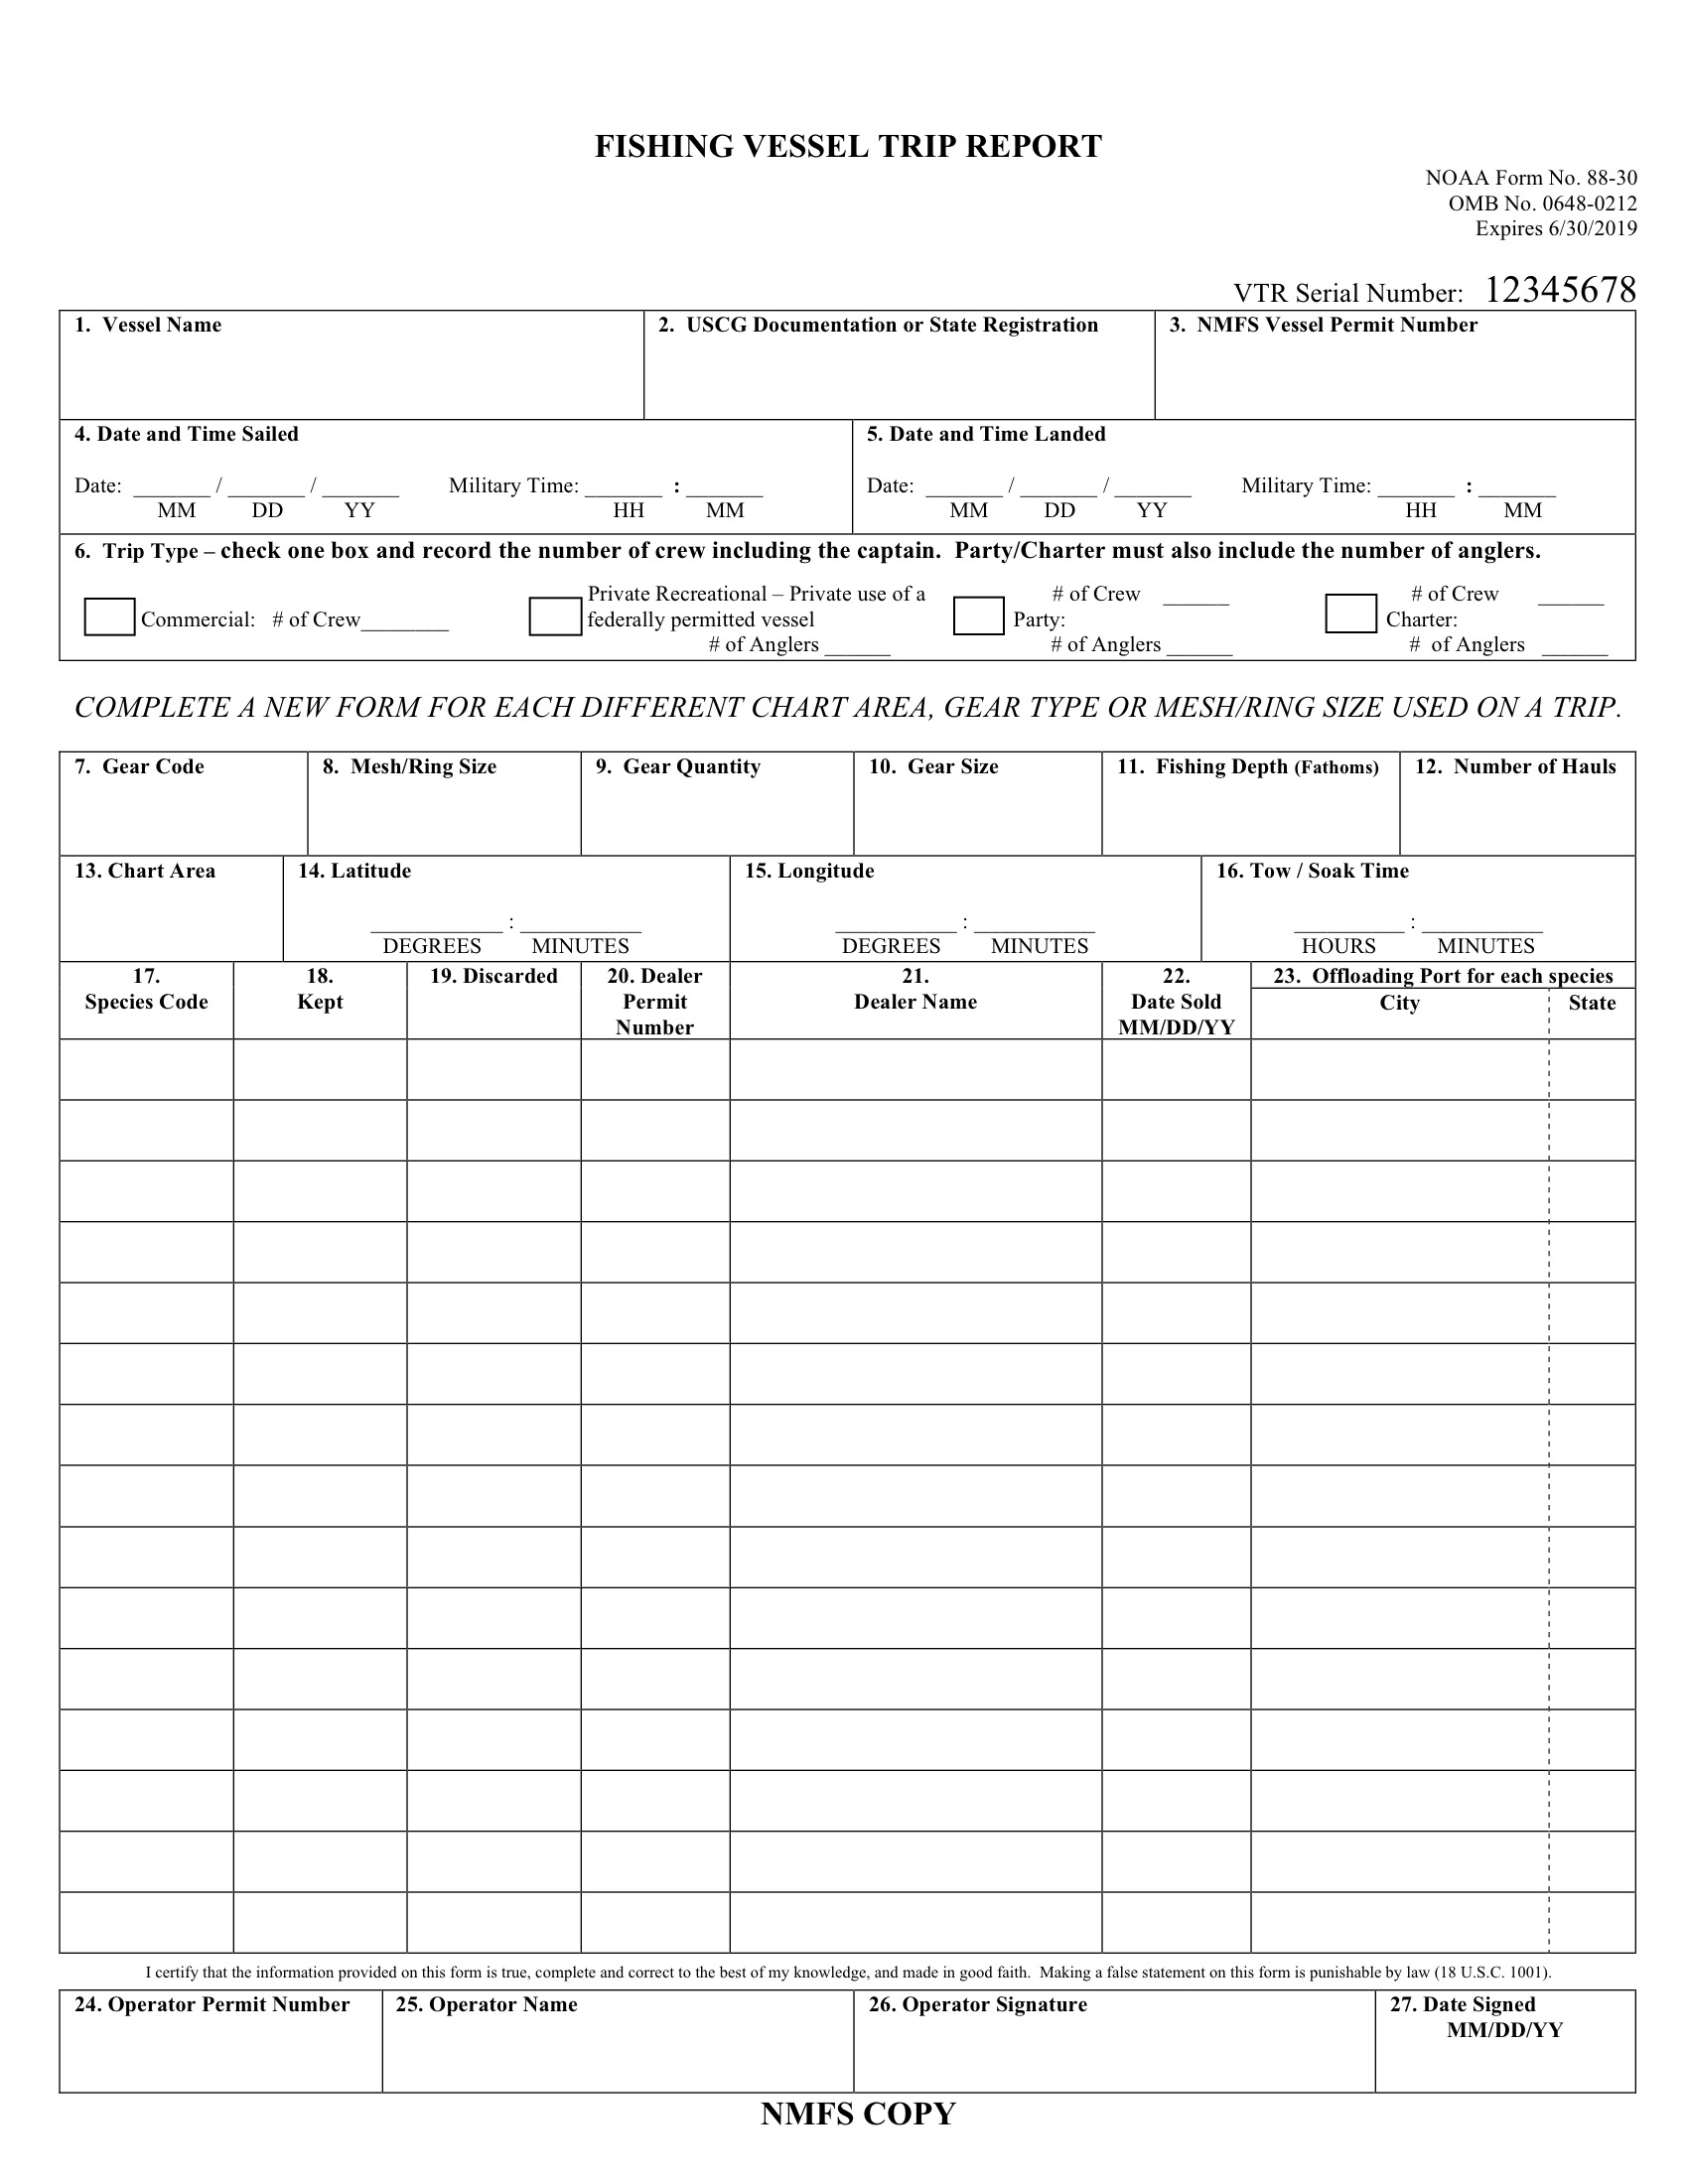 Example of Vessel Trip Reporting Form